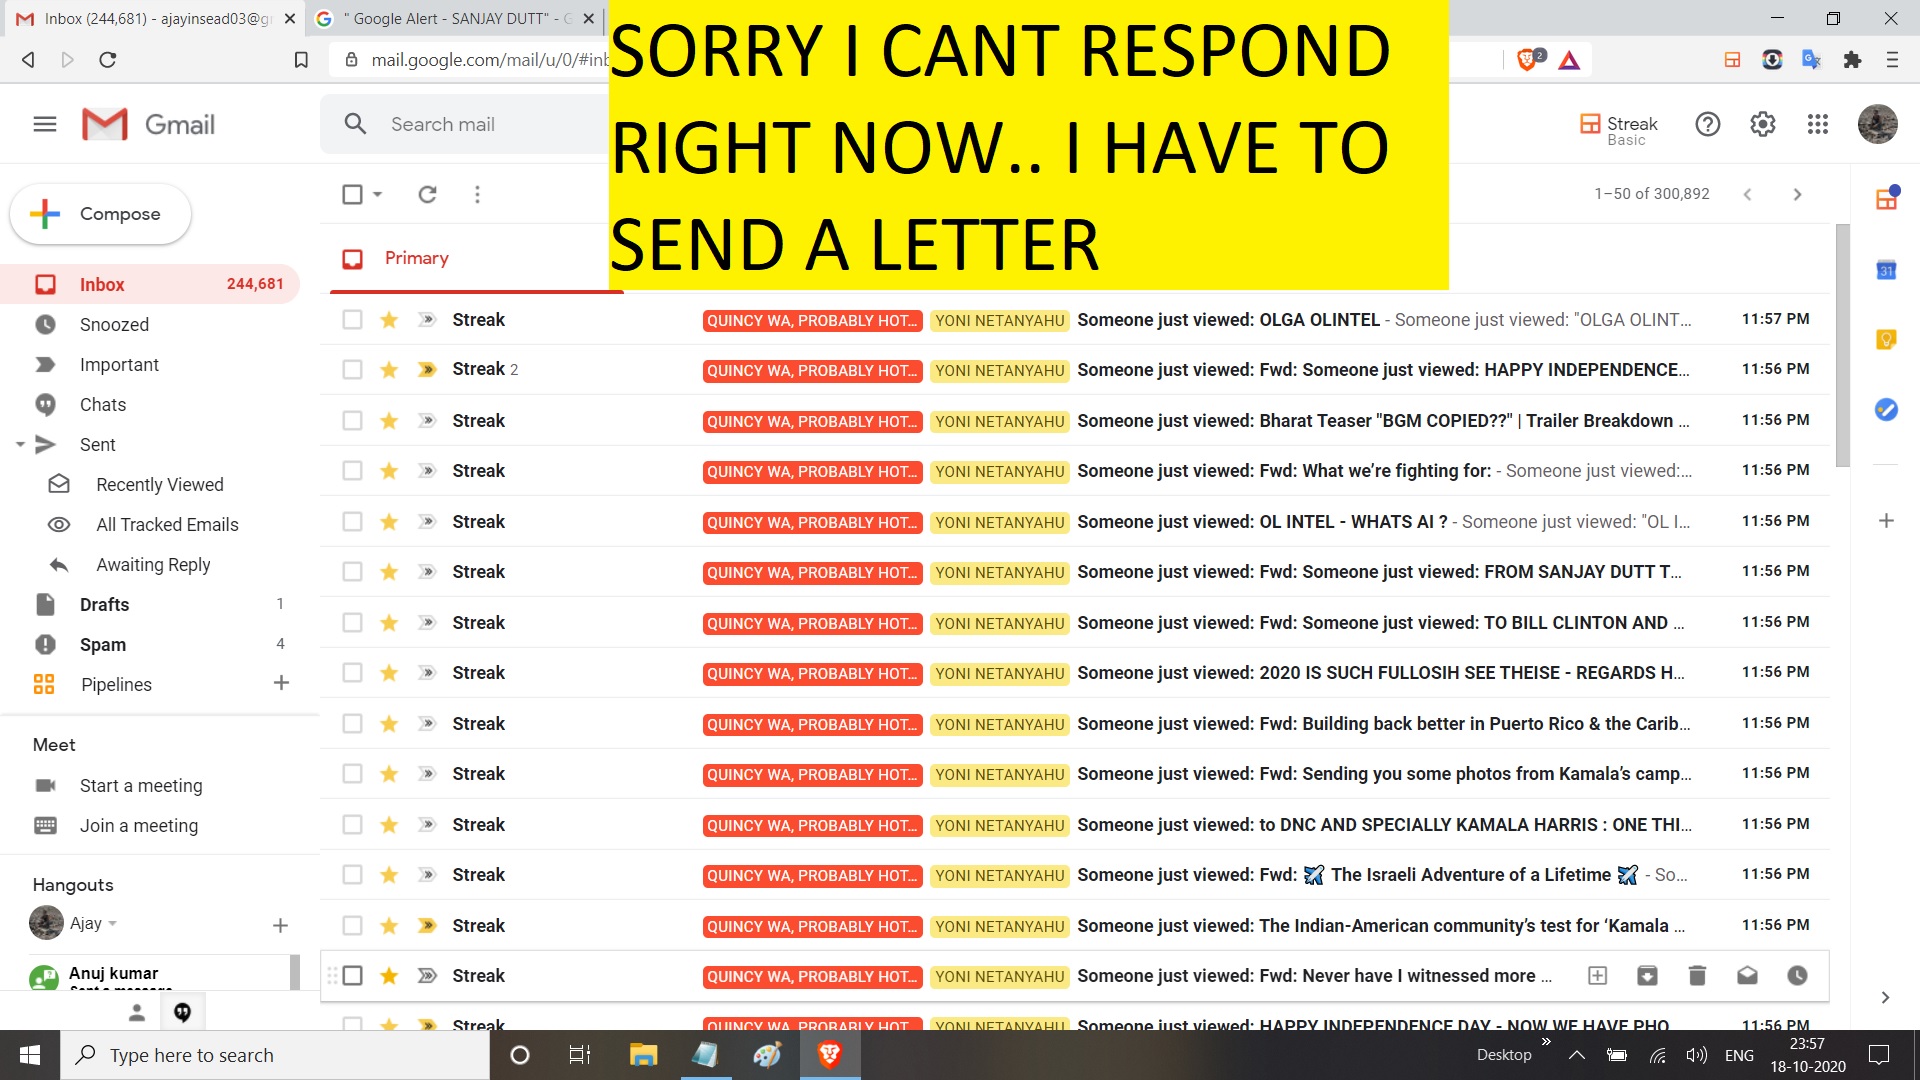 SORRY I CANT RESPOND RIGHT NOW.. I HAVE TO SEND A LETTER